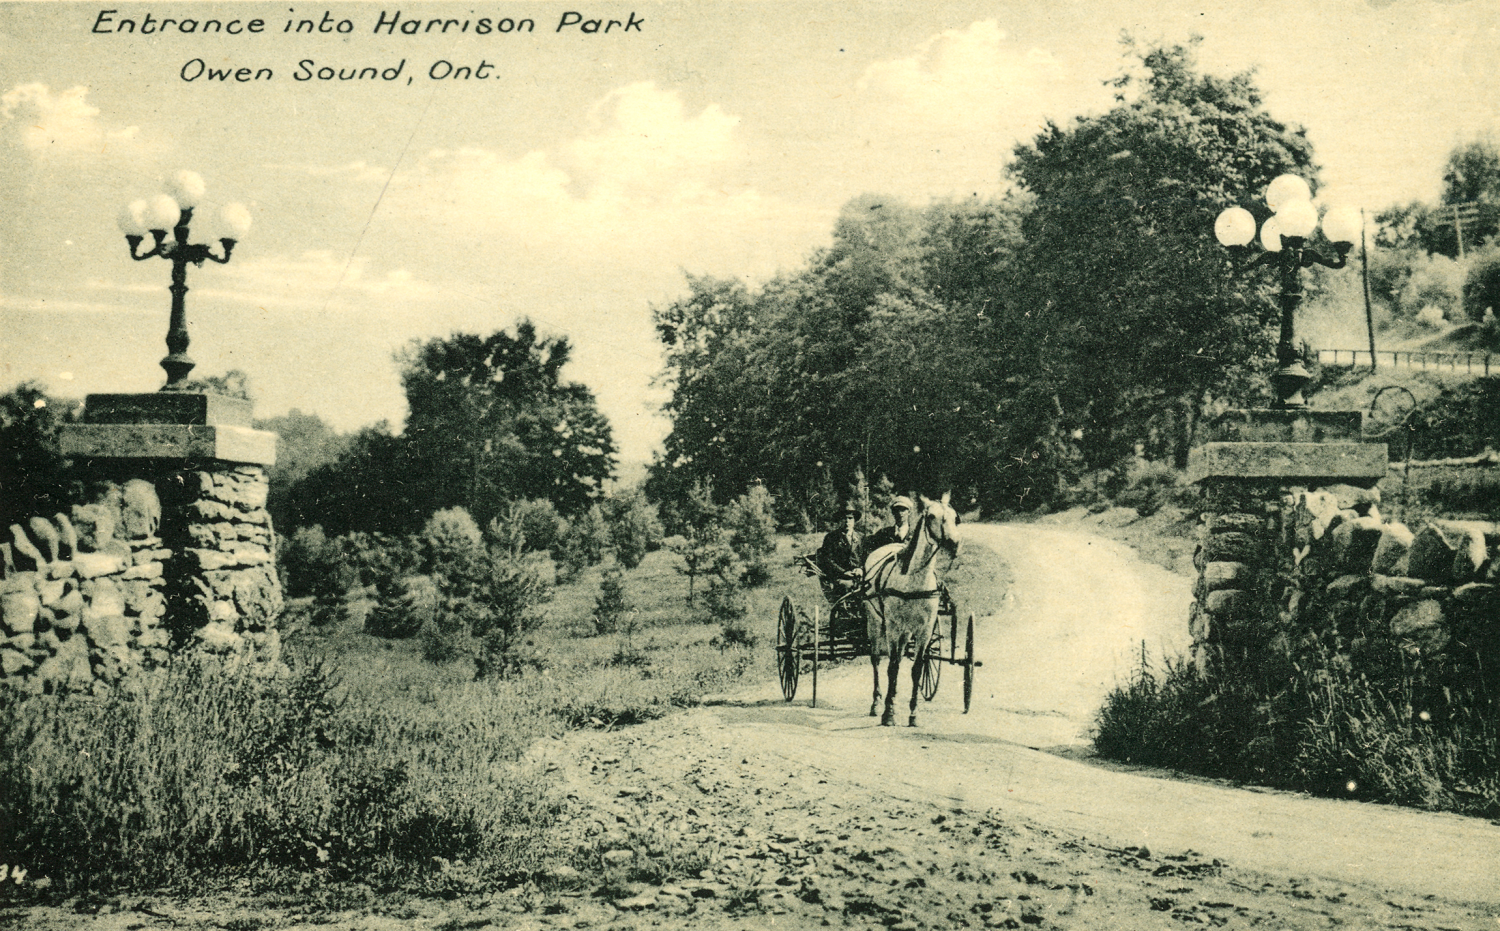 A horse drawn carriage exiting Harrison Park.